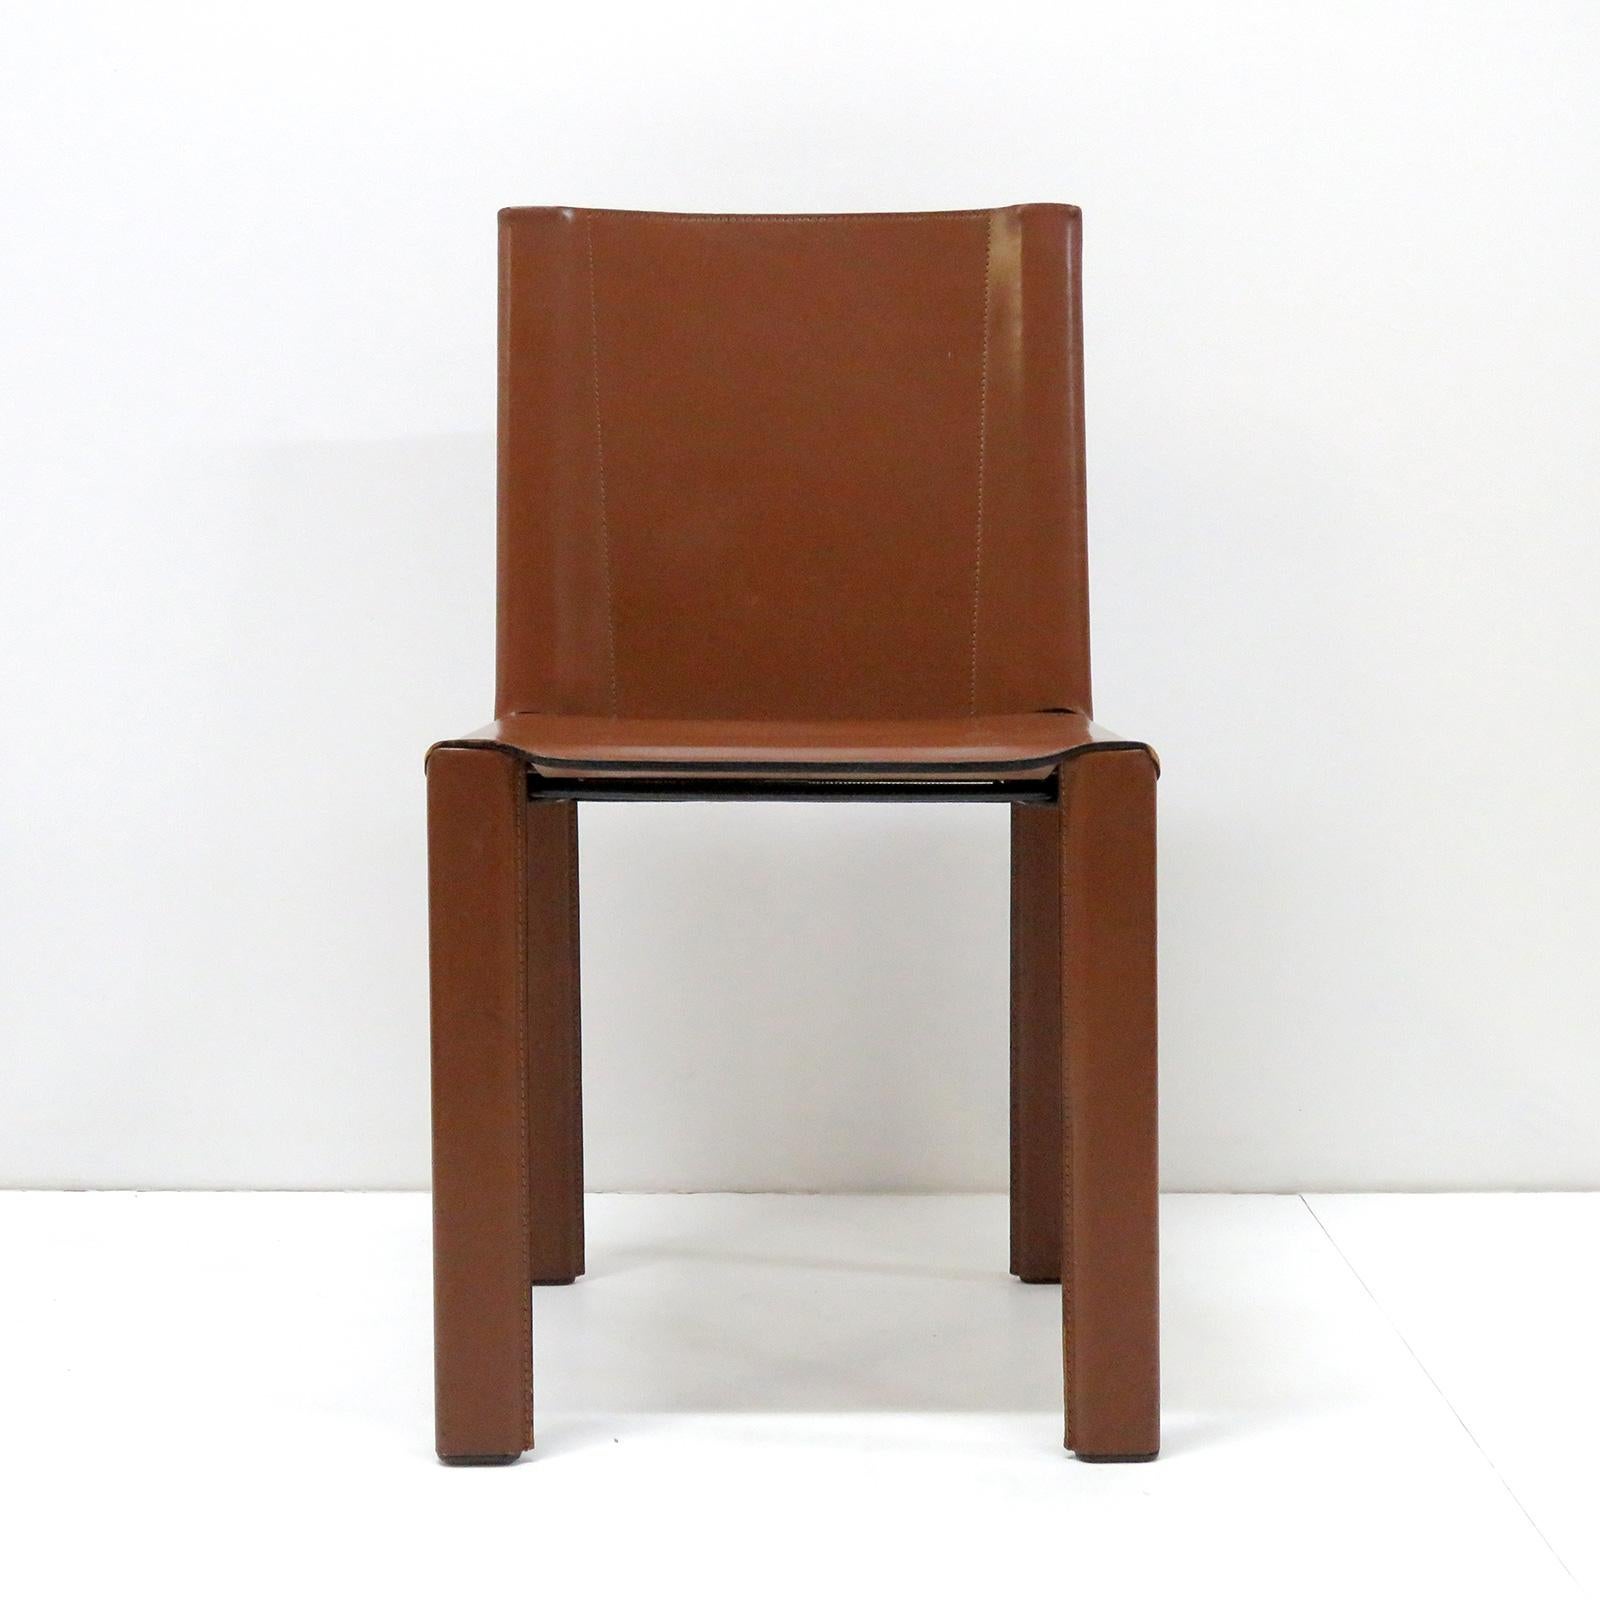 Elegant 'Coral' dining chairs designed and manufactured by Matteo Grassi, Italy, 1980, steel frames wrapped in cognac colored leather in very good condition. Five chairs plus one chair with arm rests available.